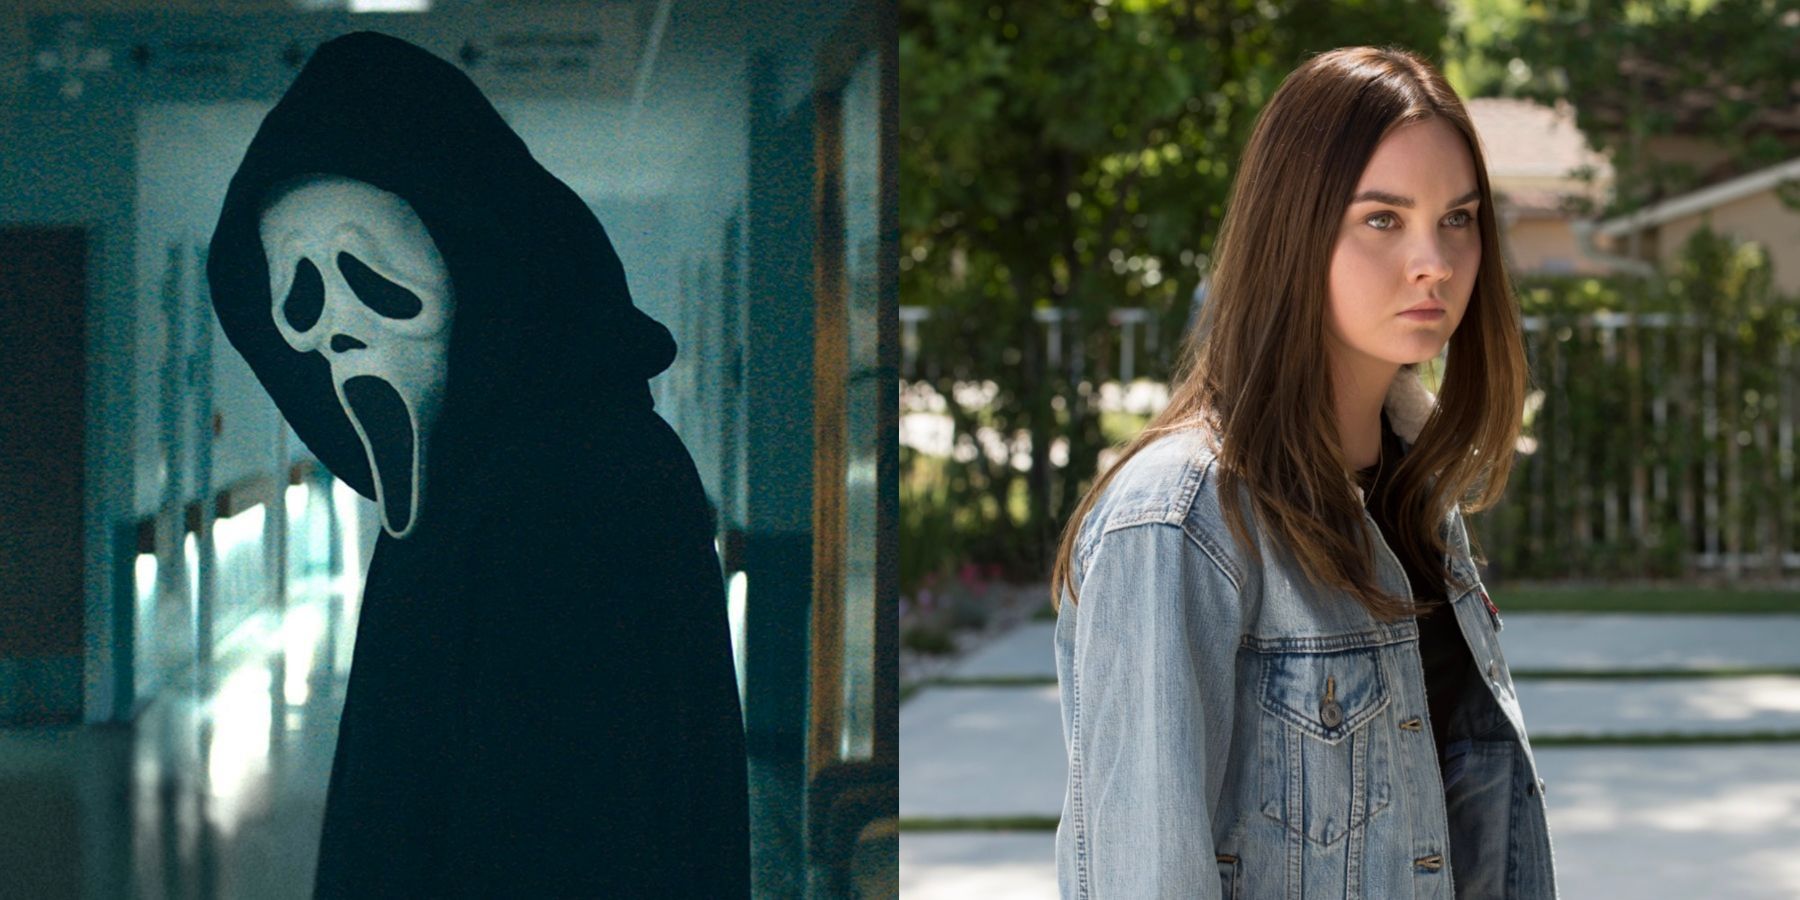 Film Updates on X: The confirmed cast of 'SCREAM 6' 🔪 Melissa